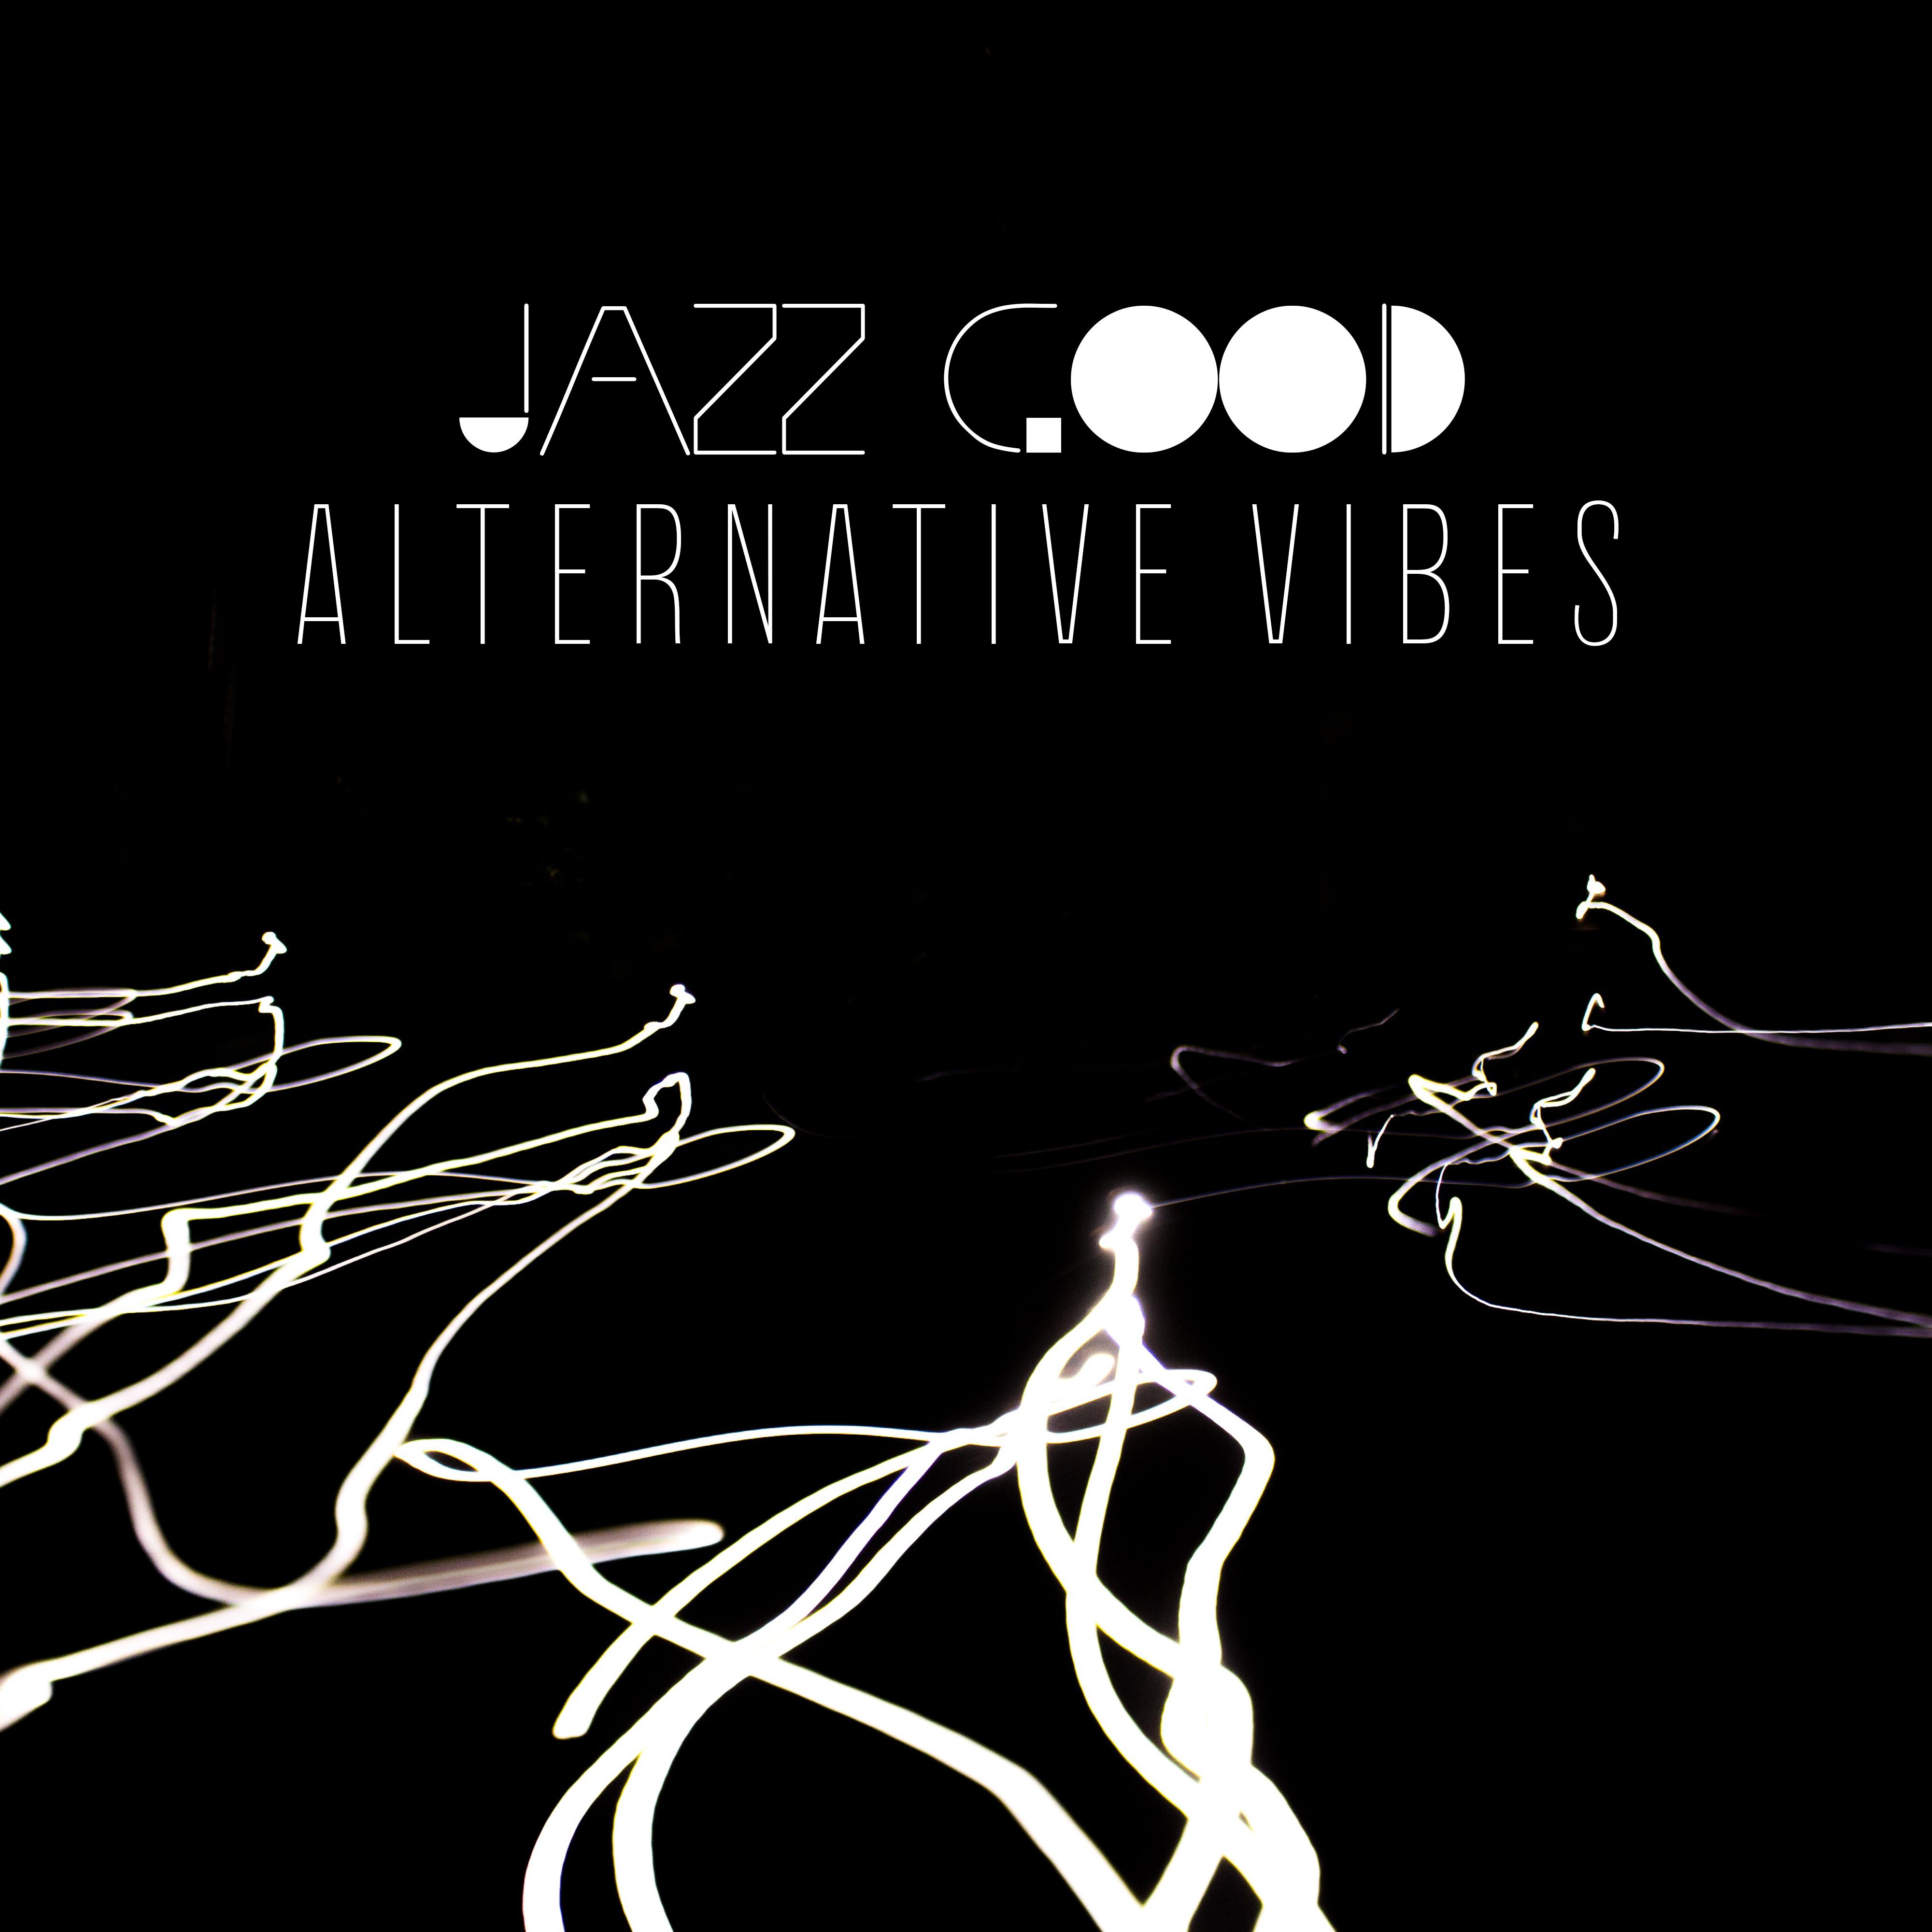 Jazz Good Alternative Vibes  Instrumental Smooth Vintage Melodies to Relax  Party with Friends